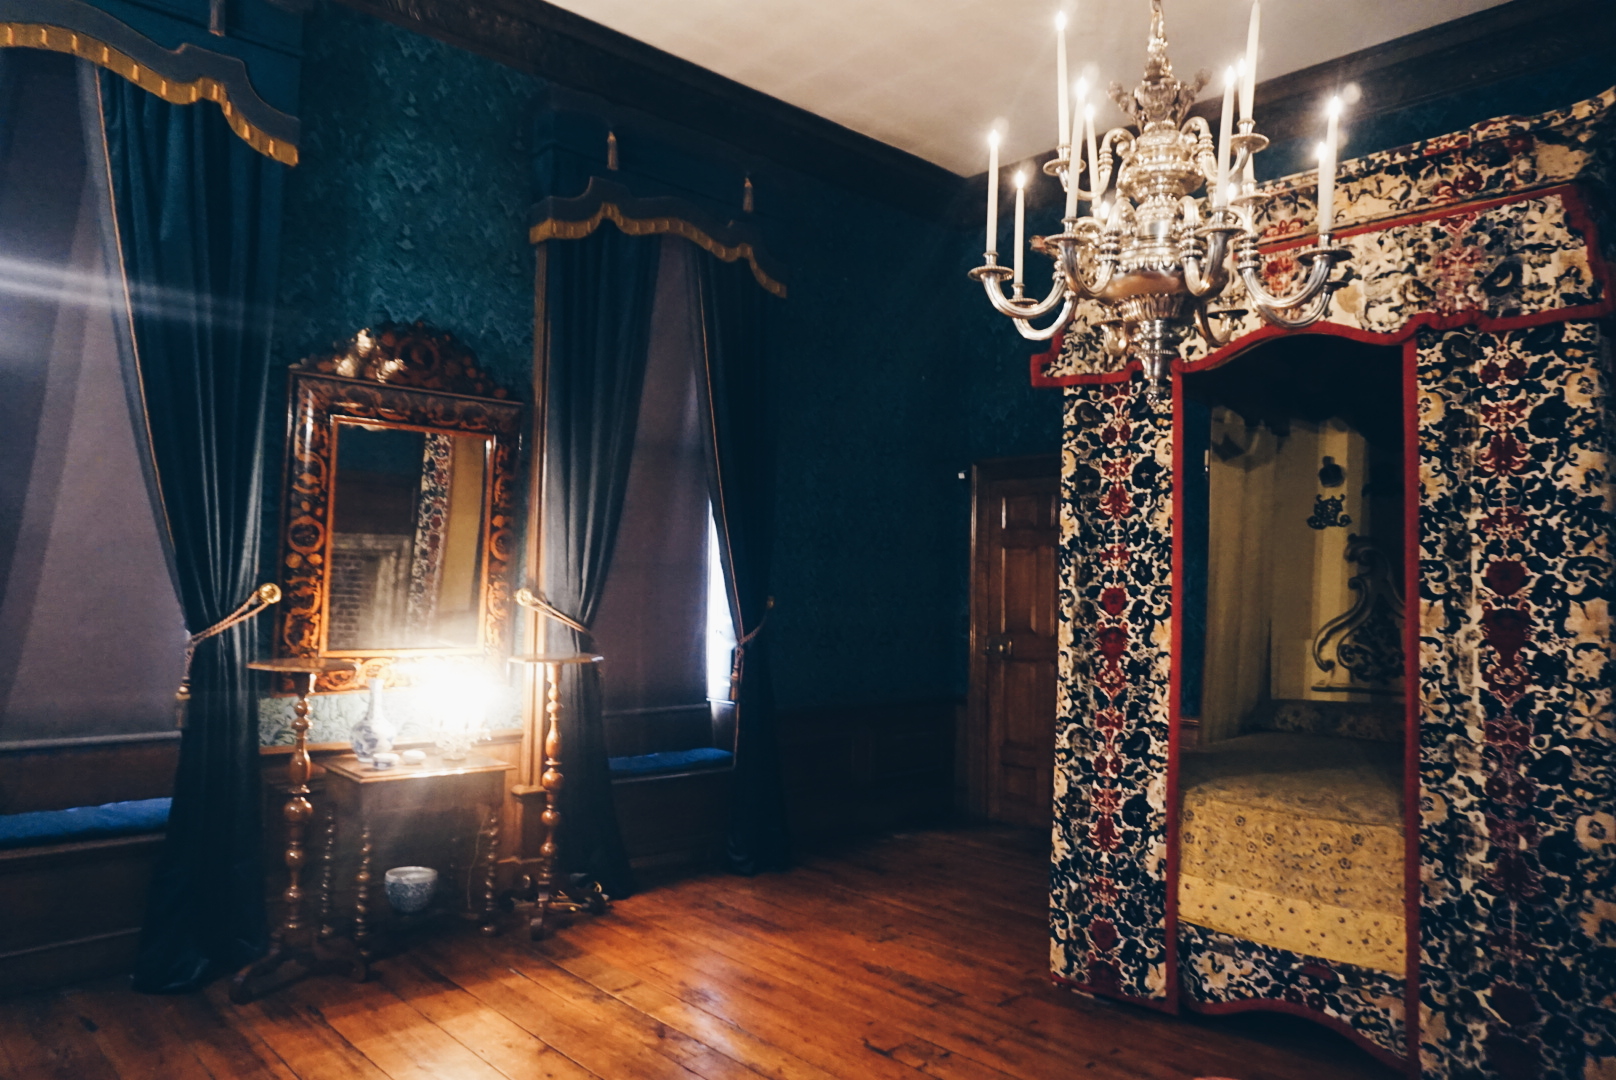 Kensington Palace The Queen's State Apartments Bedroom | The LDN Gal